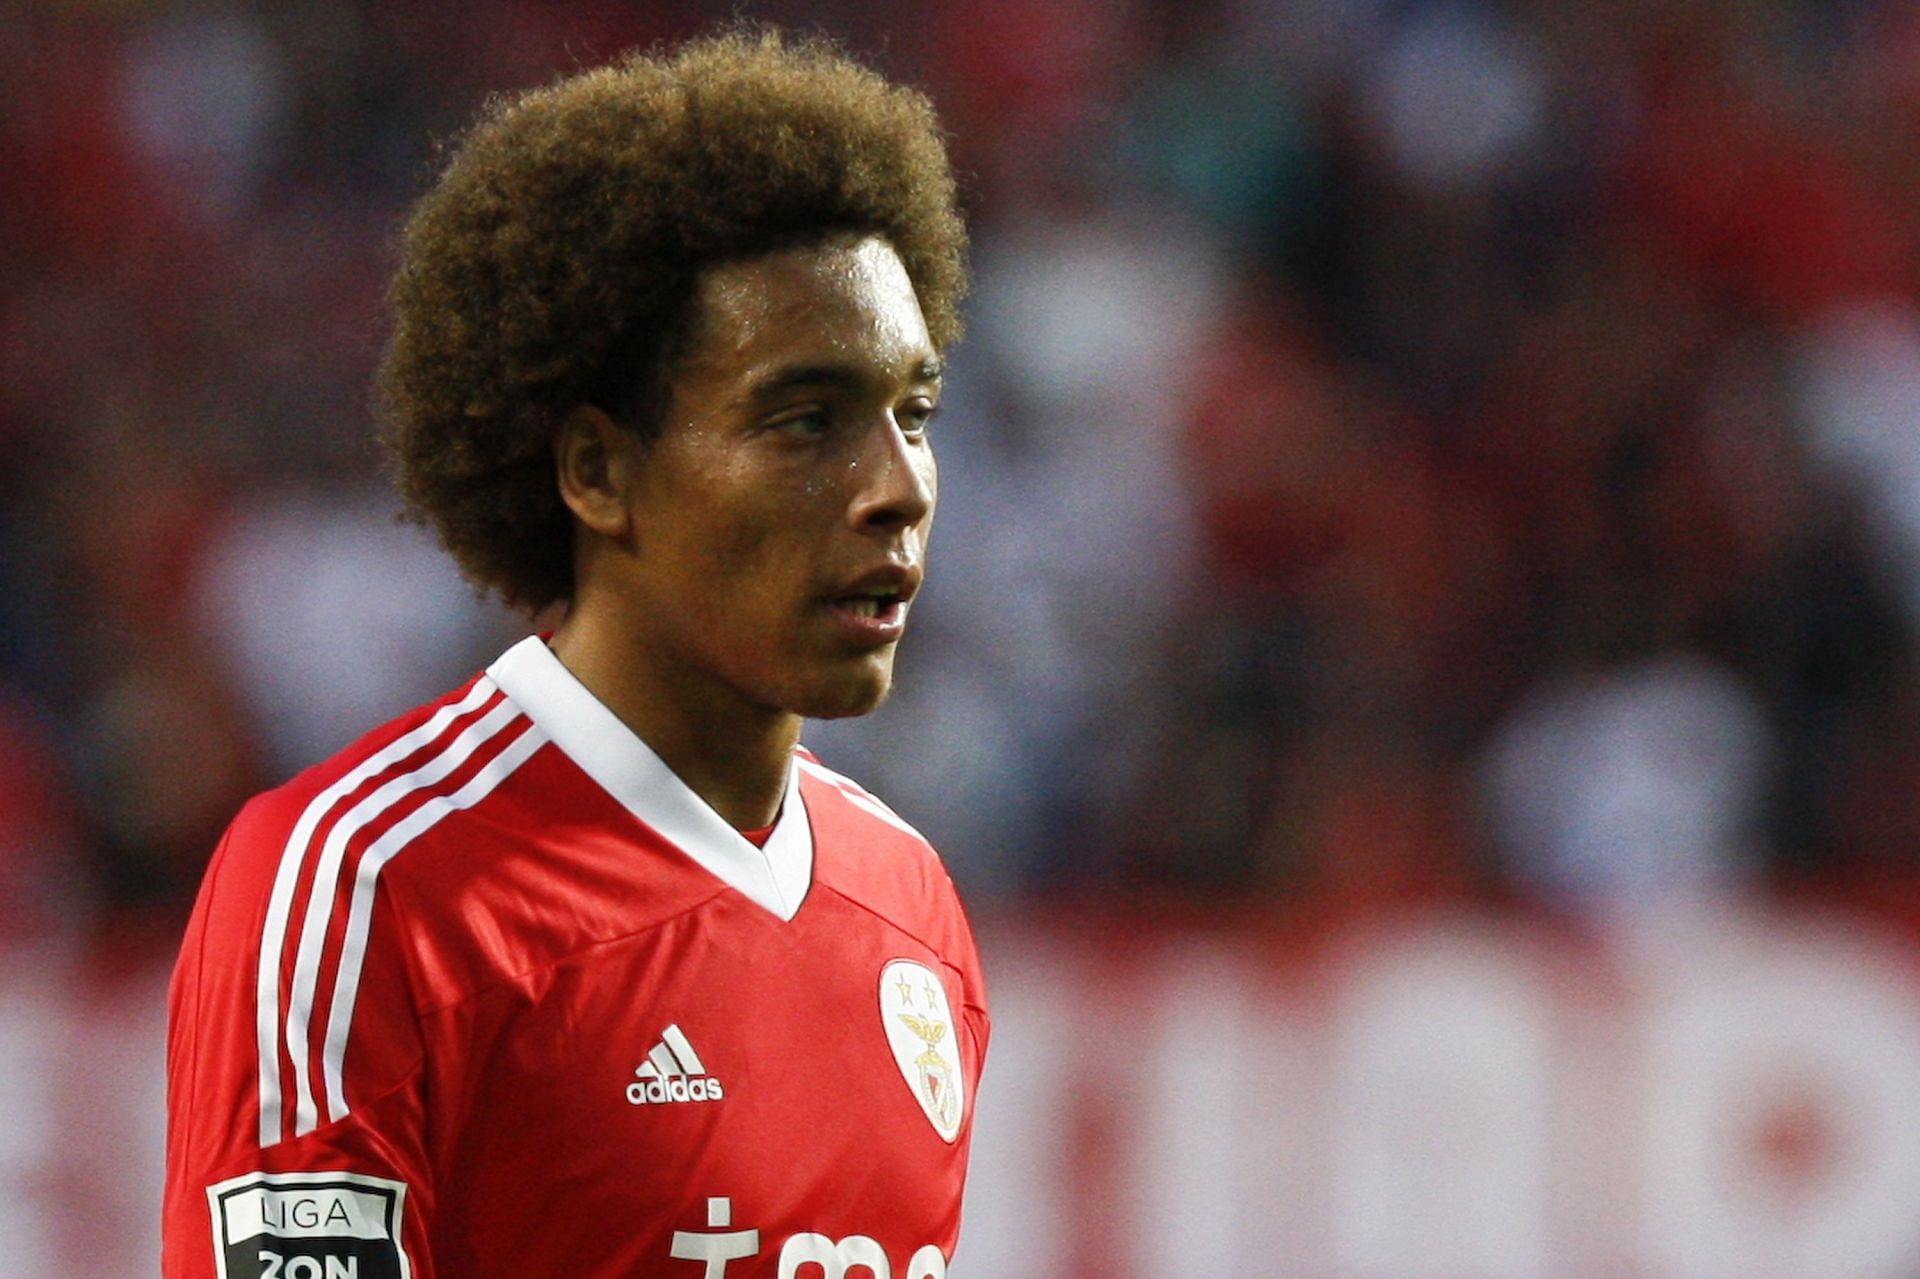 Axel Witsel at Benfica